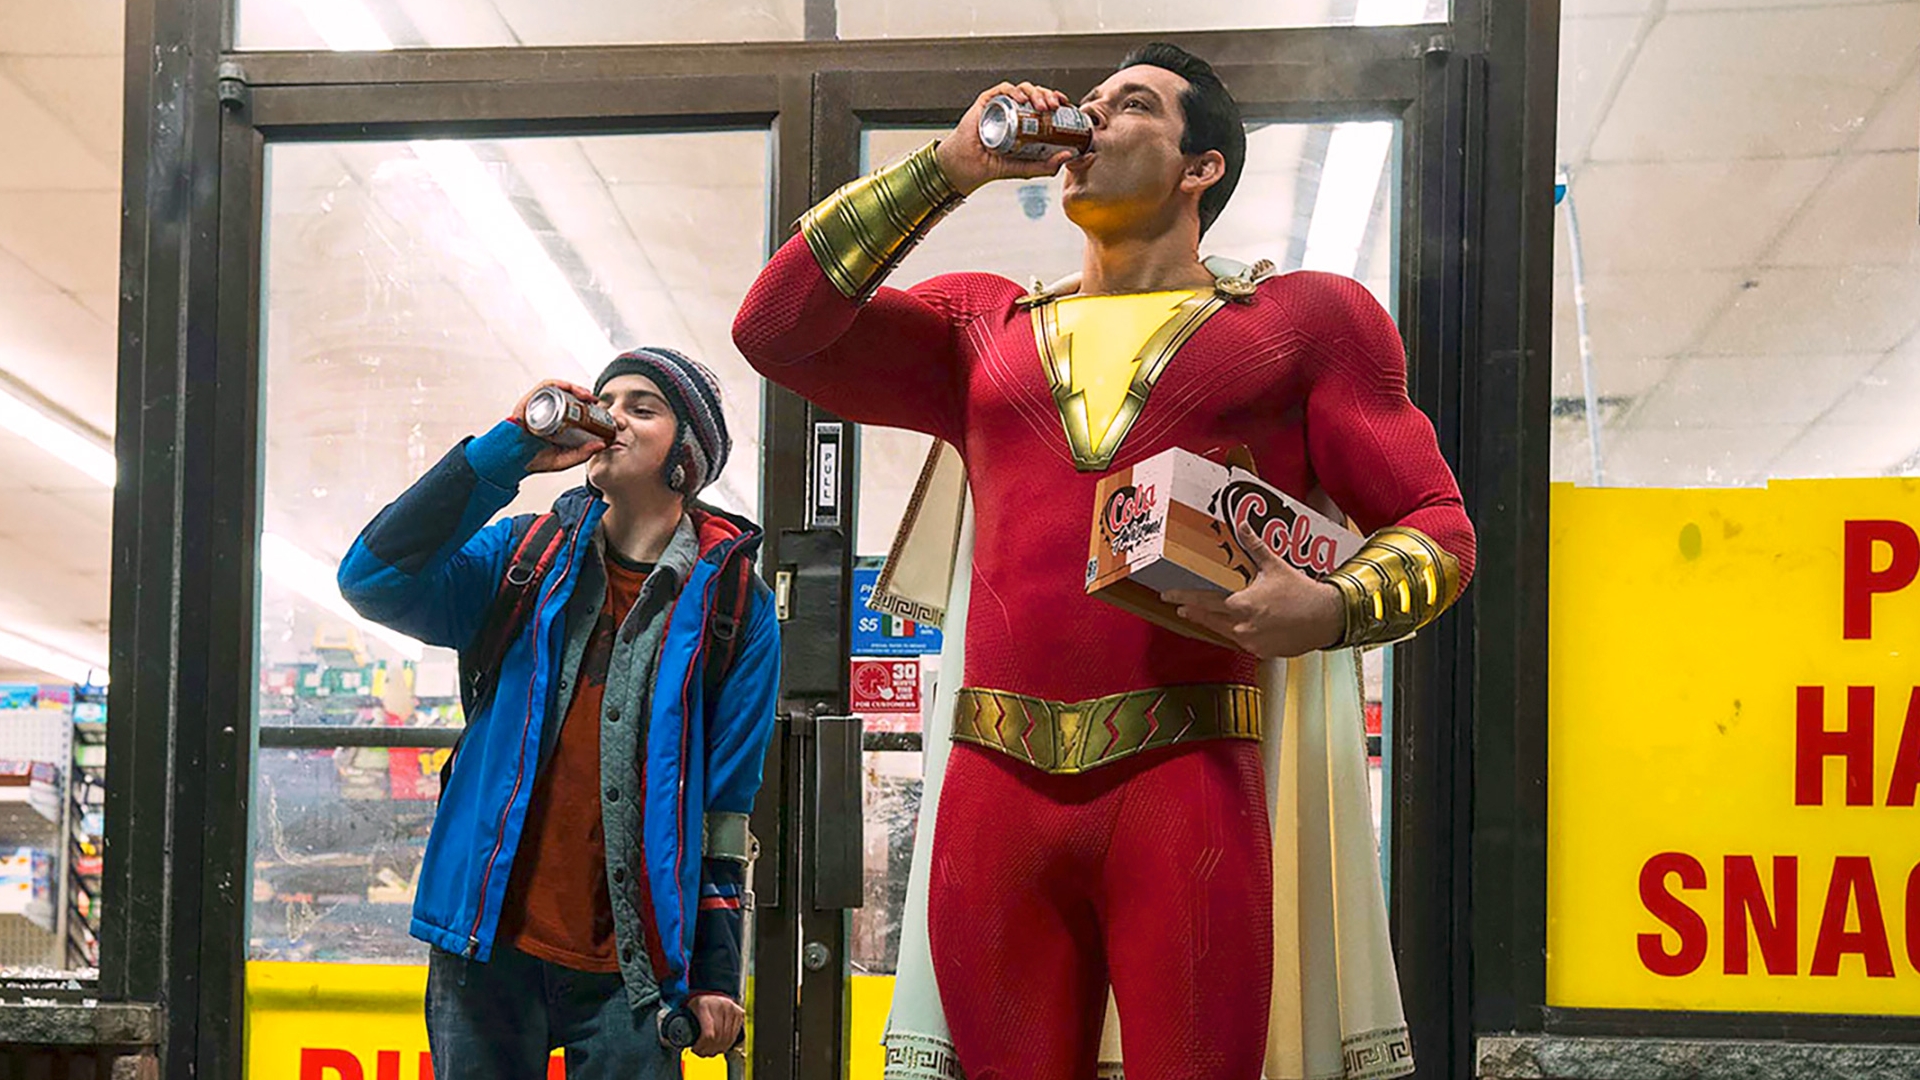 How Shazam 2 Connects to the Larger DC Universe (Spoilers)